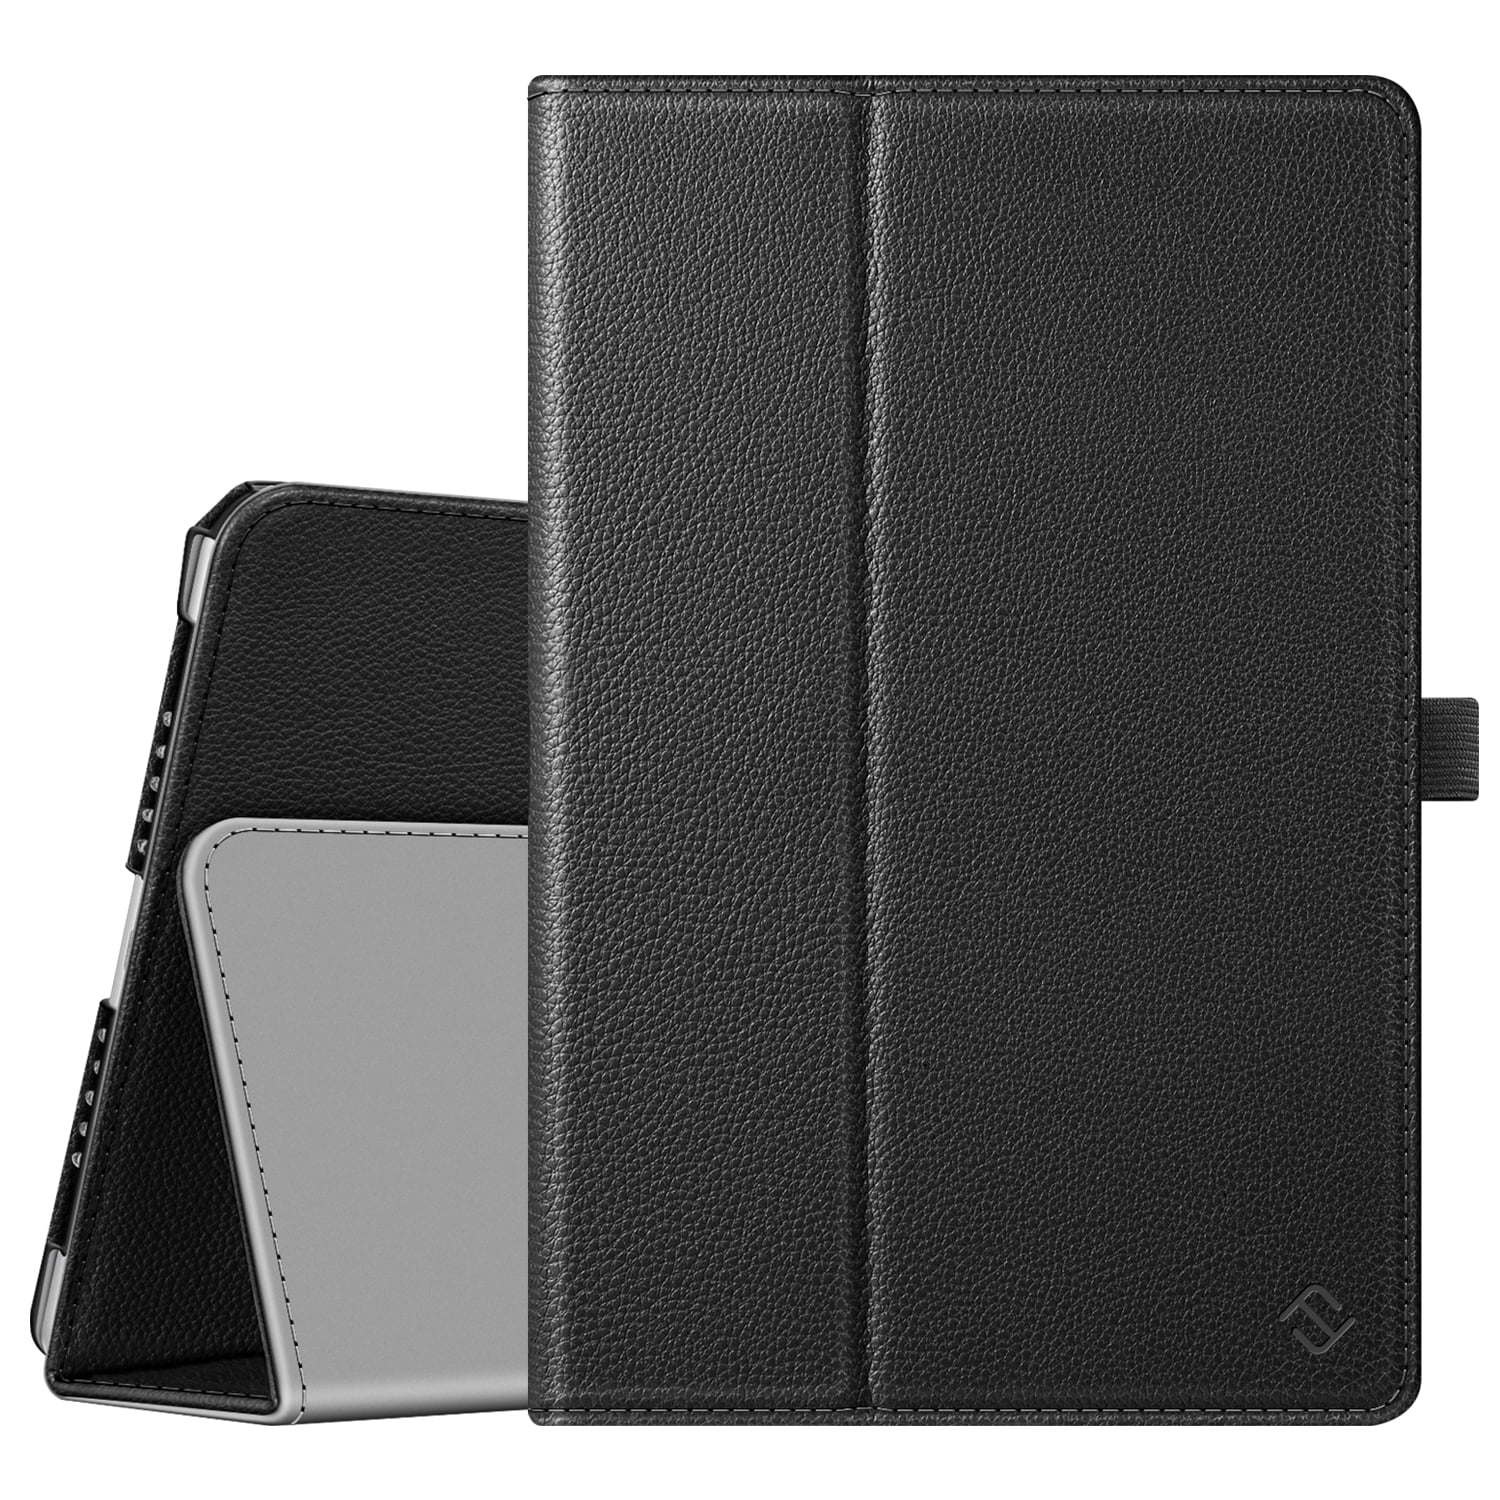 Wallet and Flip Stand With Built-in Magnet For Sleep G4GADGET® New Premium Folio Black Mixed Leather Case iPad 3 & iPad 2 Wake Feature for Apple iPad 4 Cover